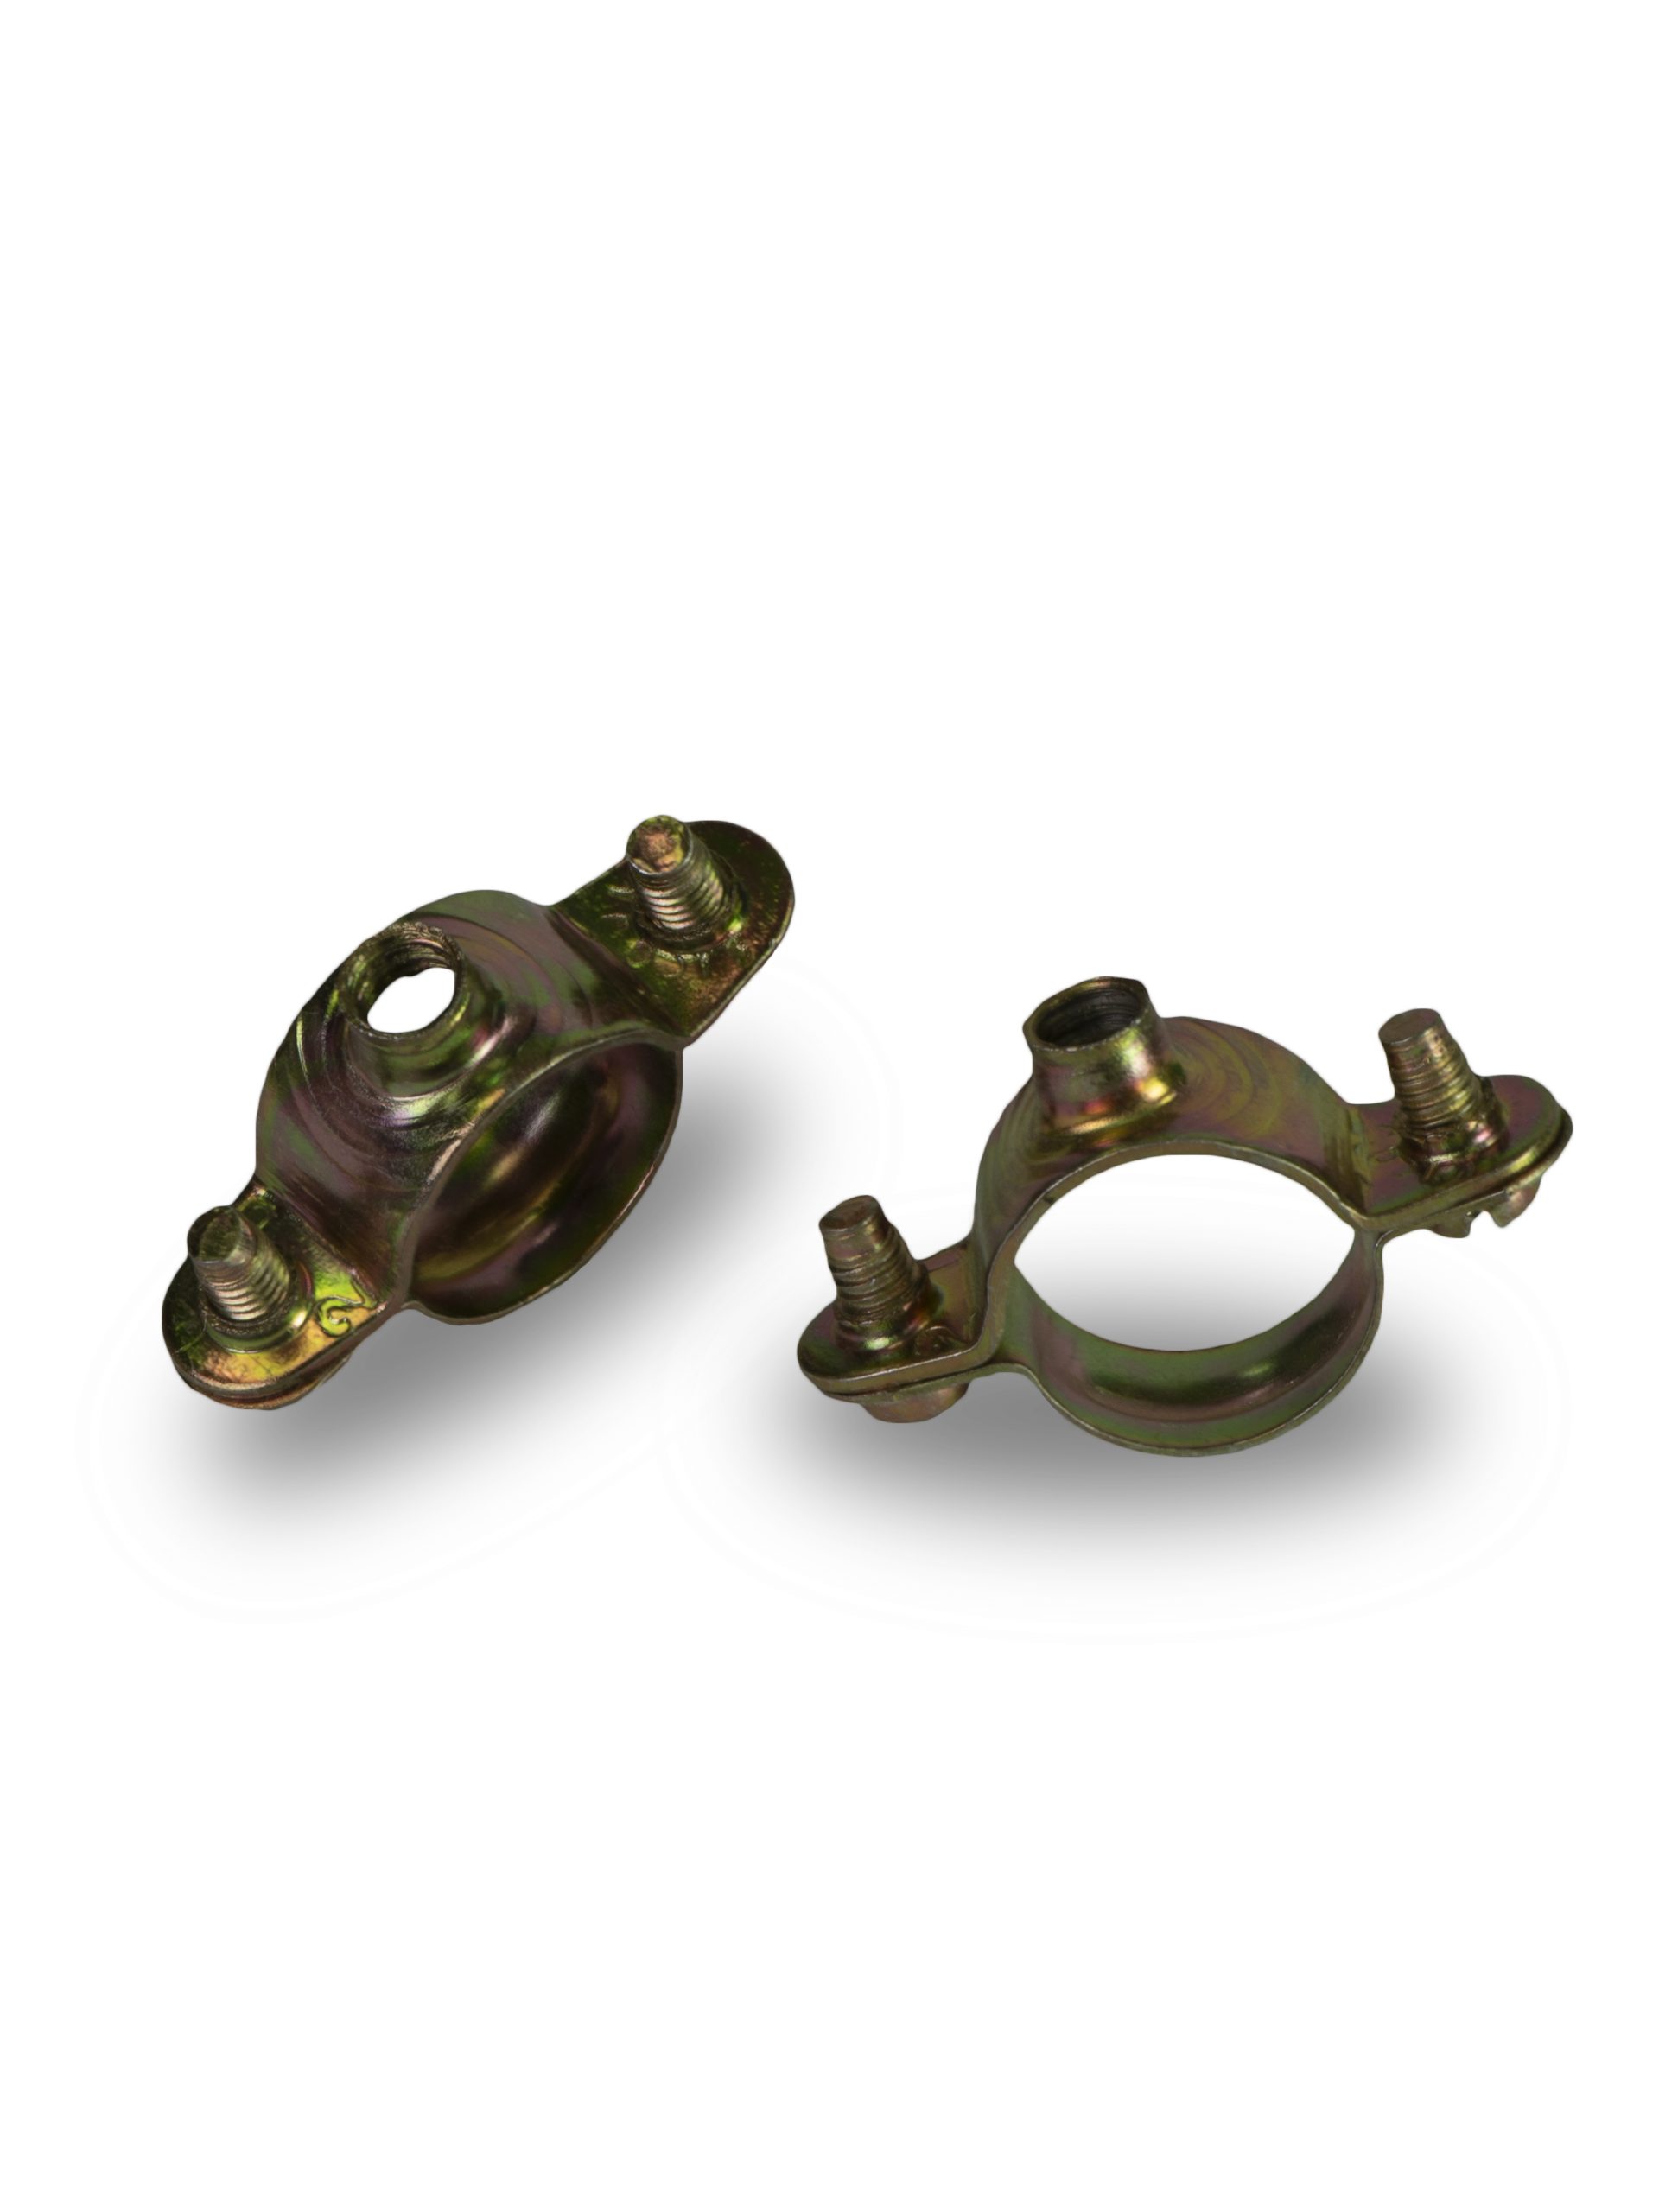 CLAMPS FOR PIPE 38MM , SICOVIS from Gas Equipment Company Llc Abu Dhabi, UNITED ARAB EMIRATES